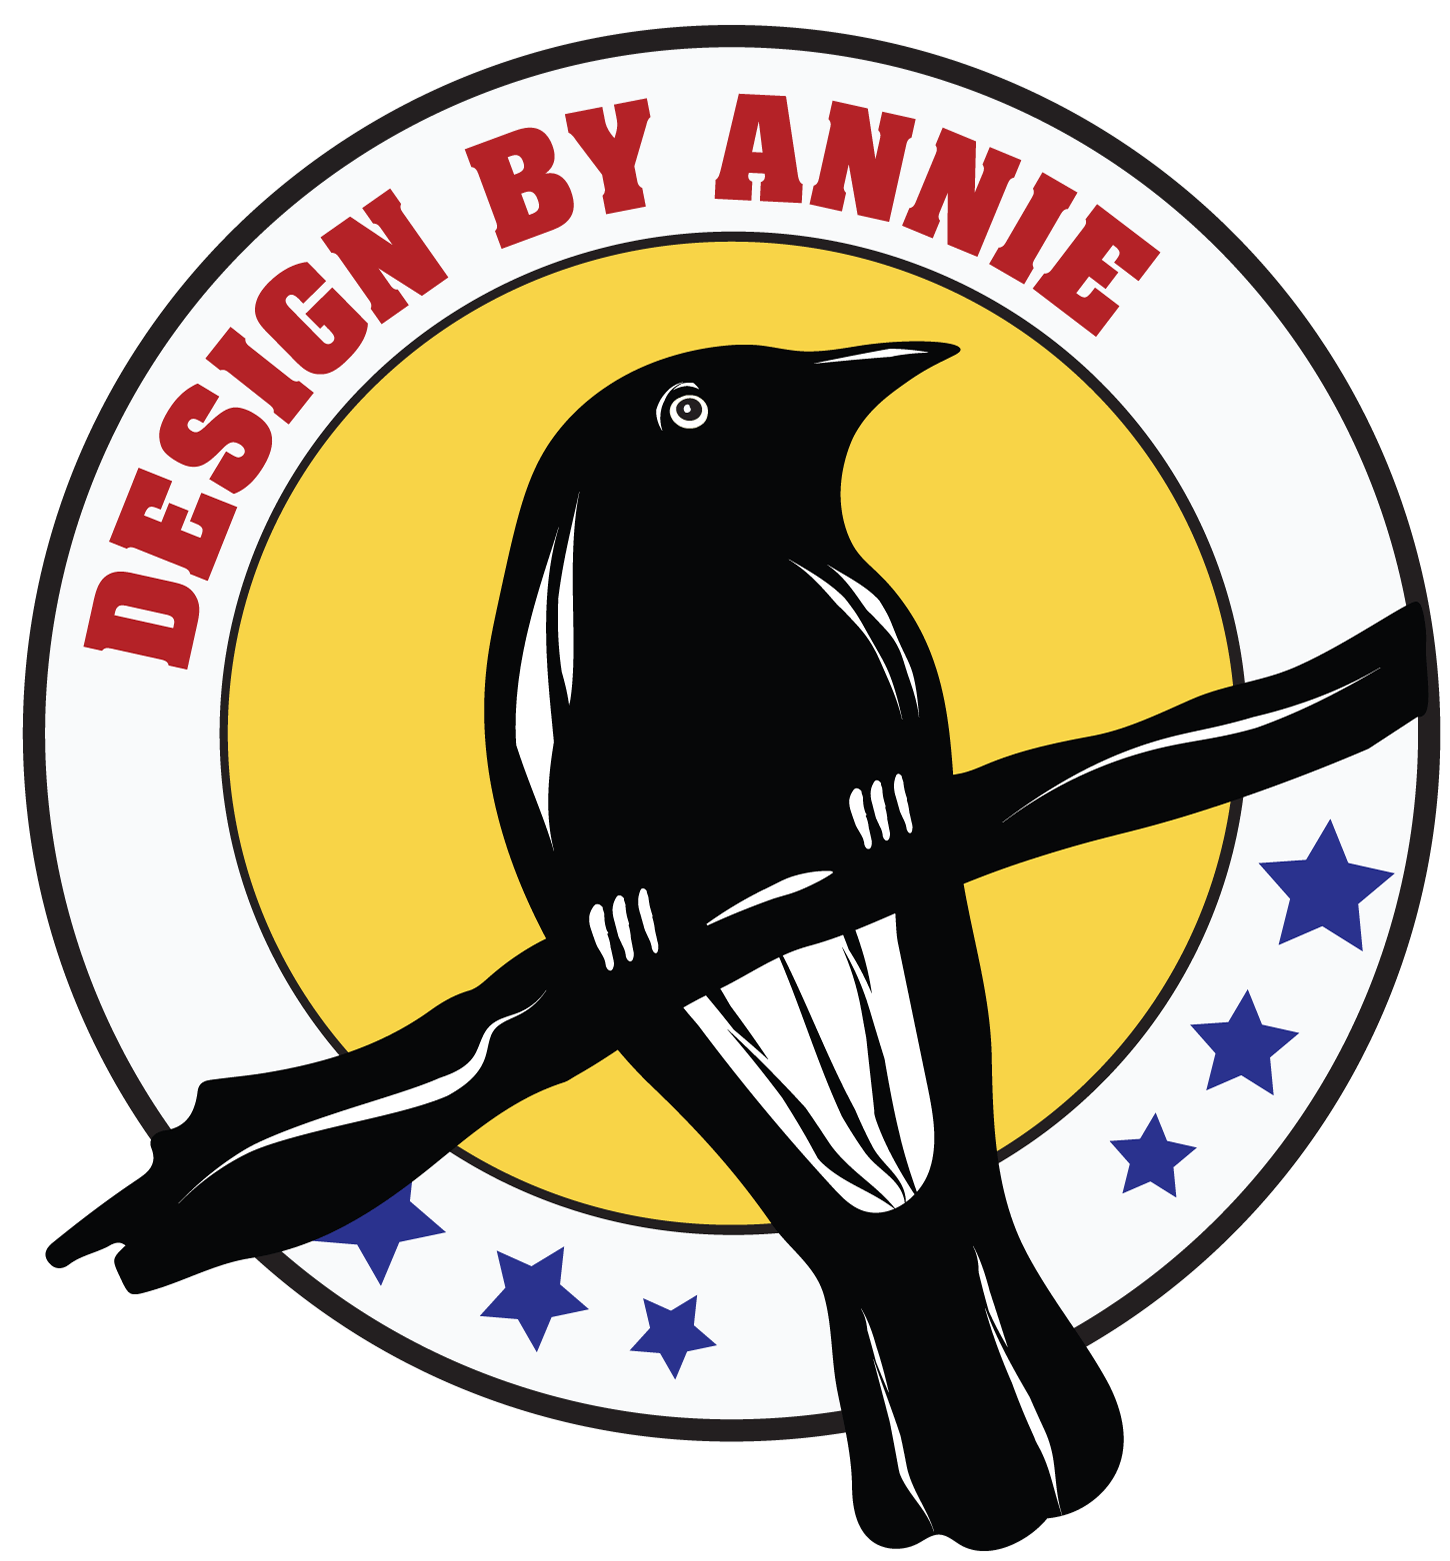 Annie's Graphic Design logo of a currawong